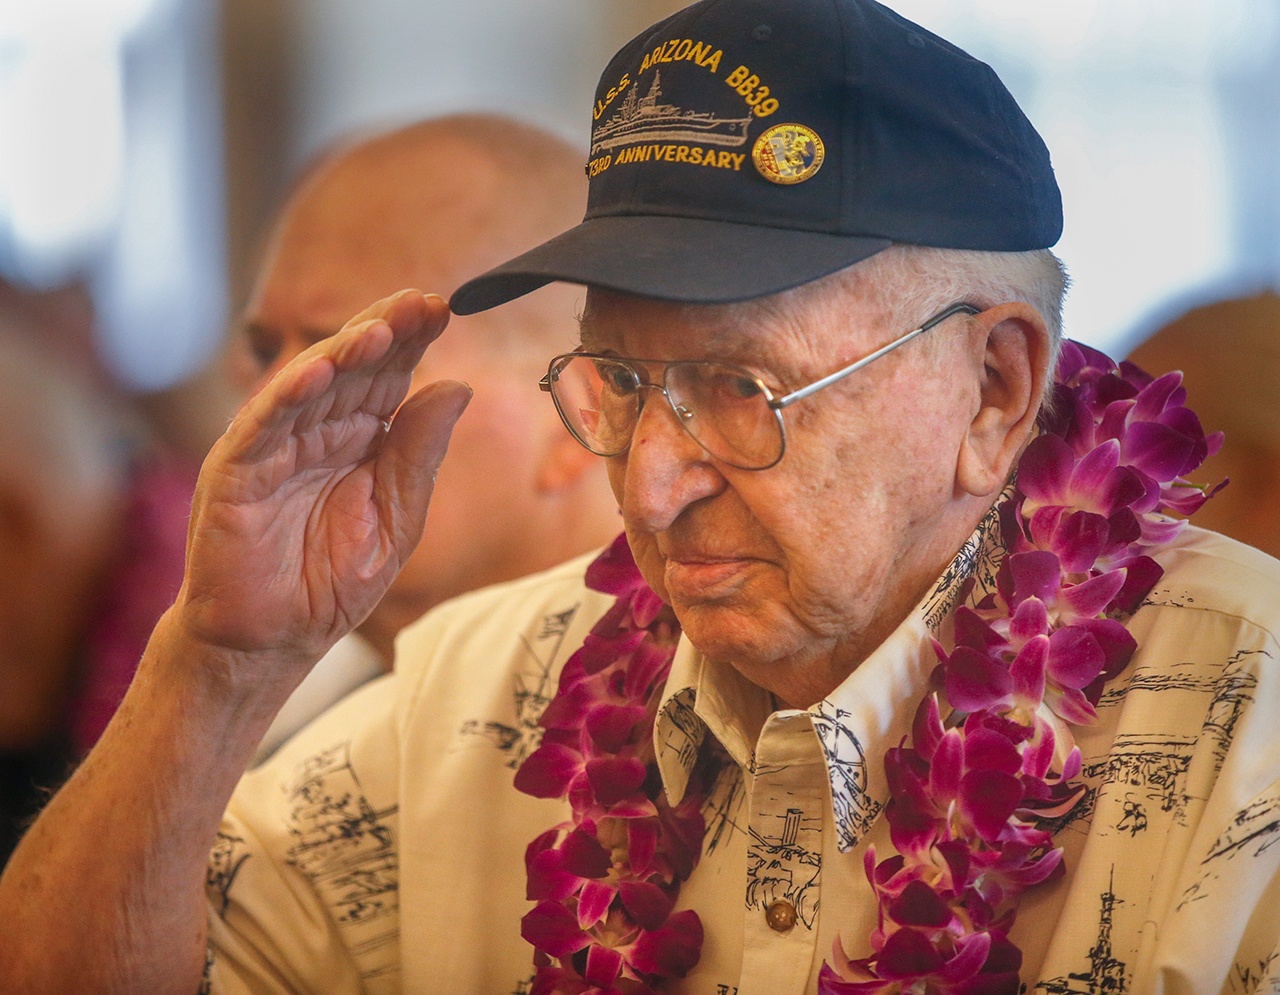 Pearl Harbor survivor Lauren F. Bruner, who still mourns his lost shipmates from the USS Arizona, salutes the flag during the presentation of the colors during a ceremony in Newport Beach, Calif., honoring eleven of the survivors as the 75th anniversary of the attack approaches, on October 26, 2016. (Mark Boster/Los Angeles Times)